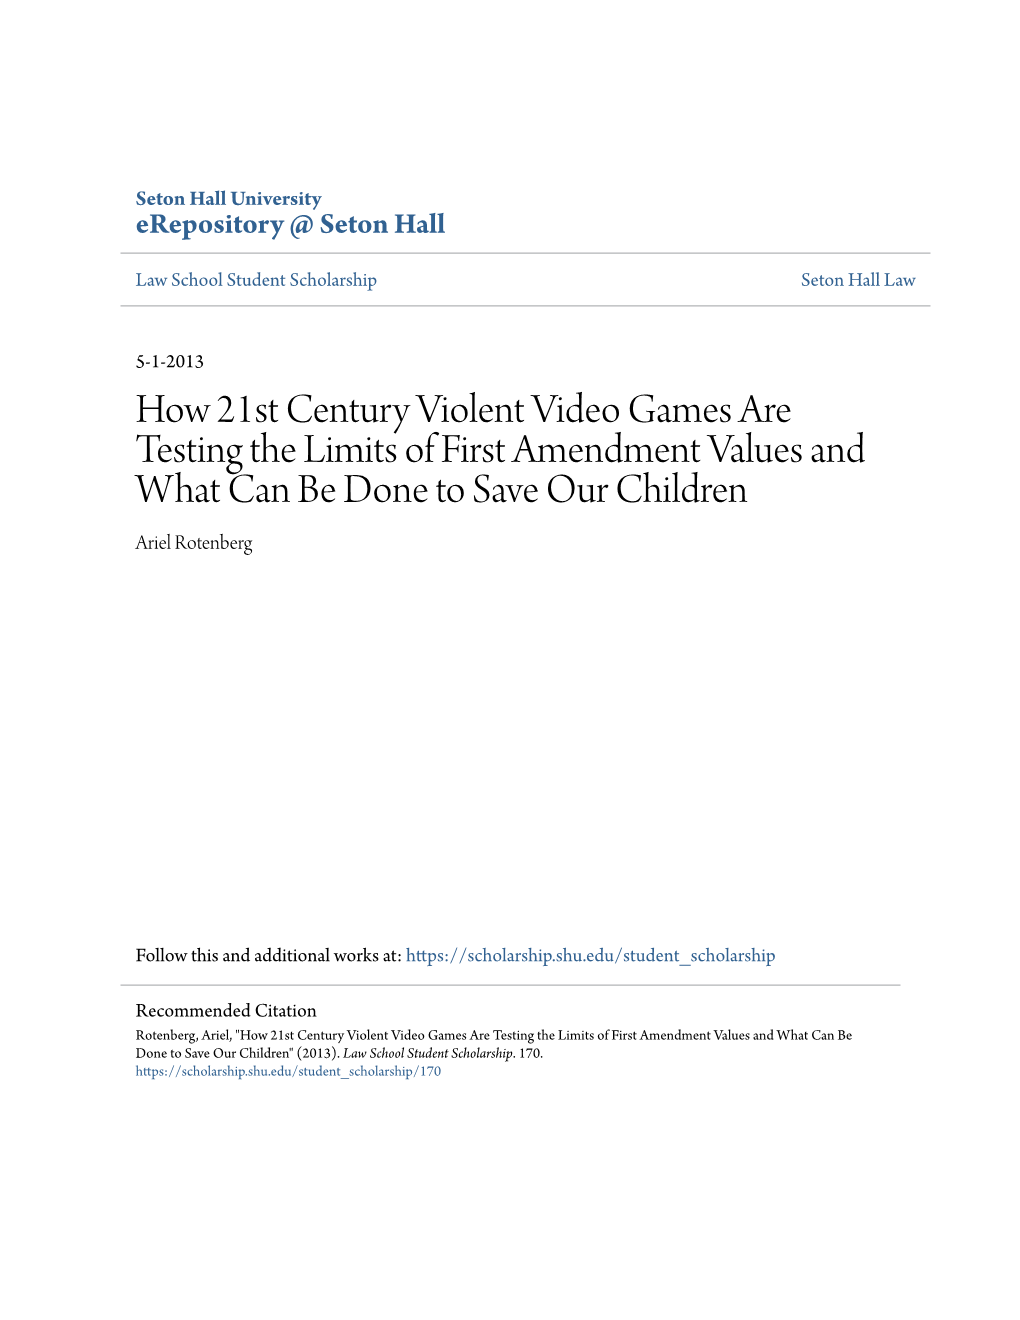 How 21St Century Violent Video Games Are Testing the Limits of First Amendment Values and What Can Be Done to Save Our Children Ariel Rotenberg